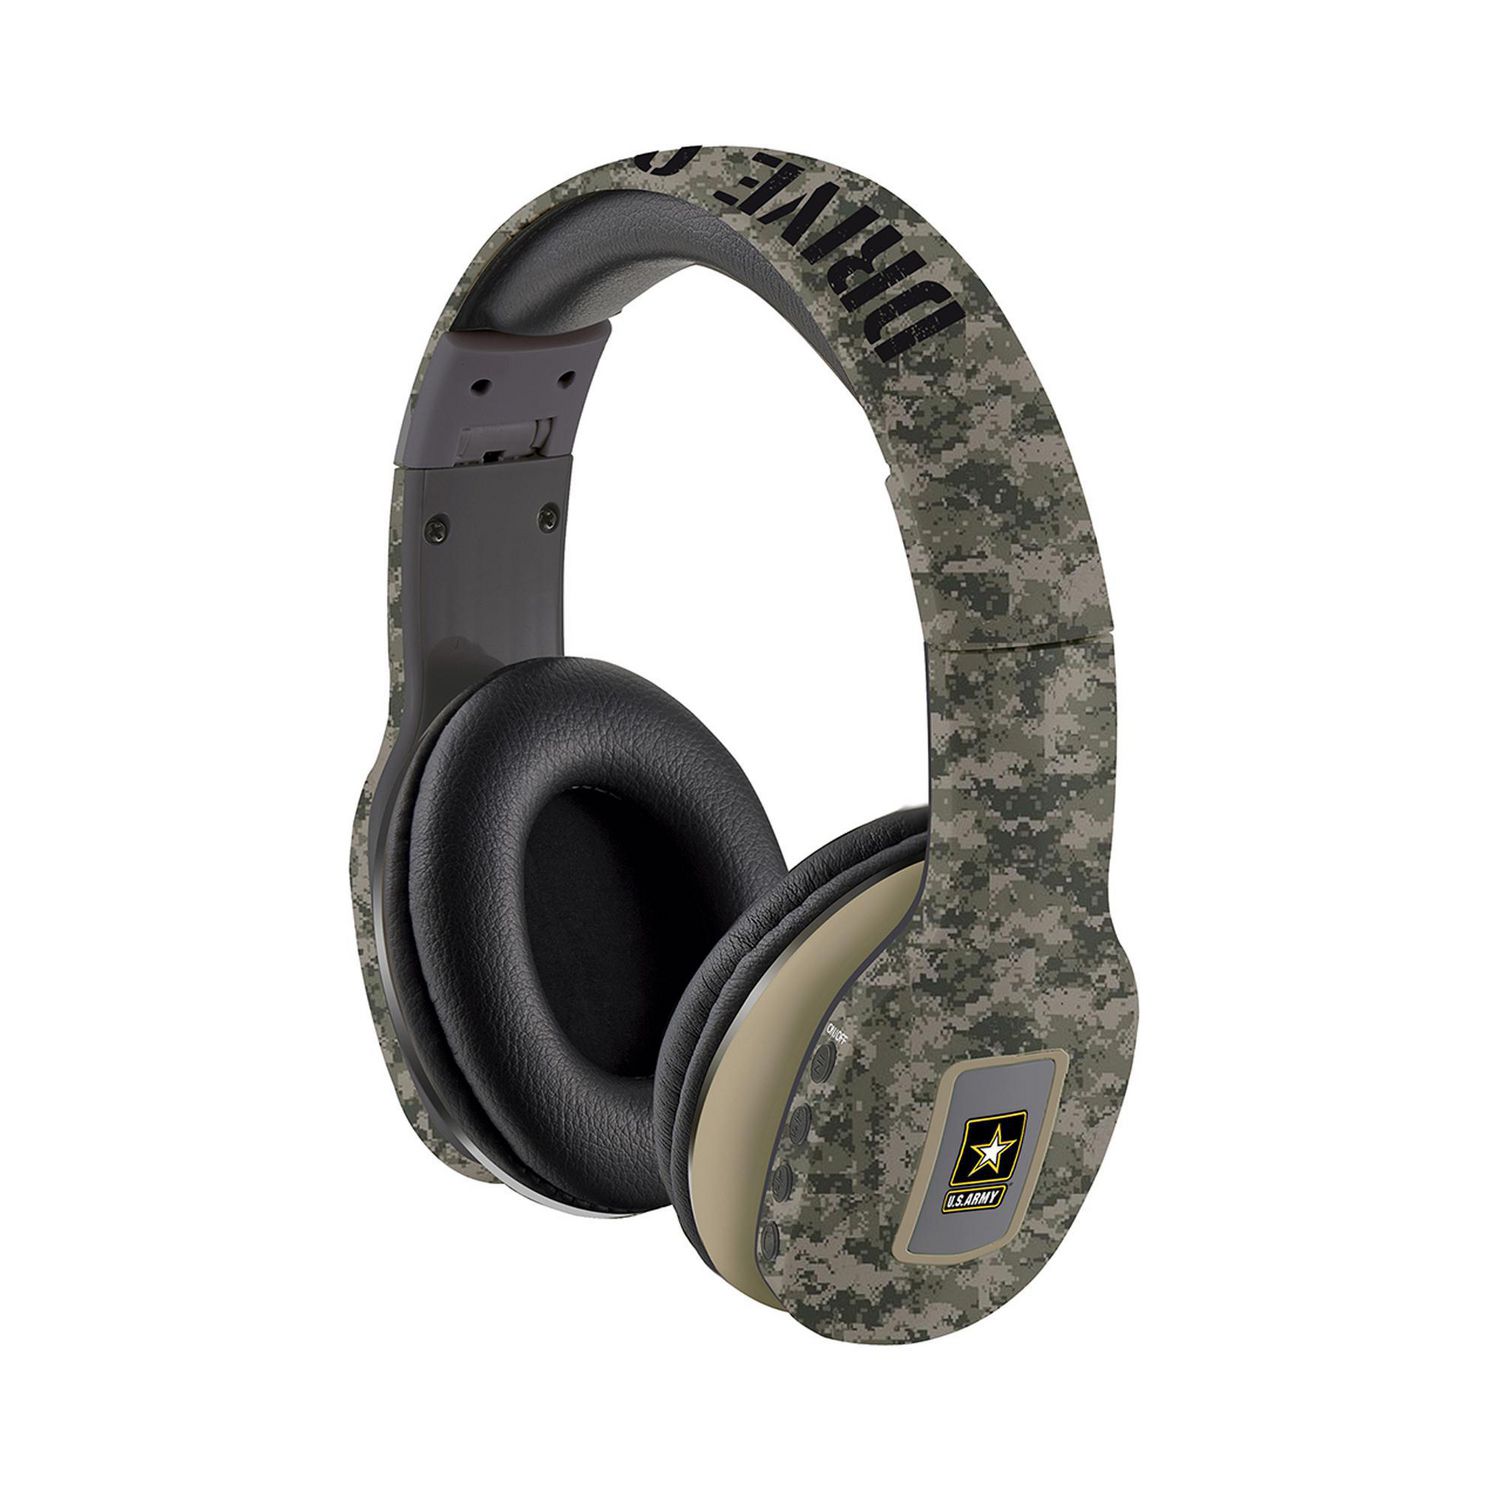 U.S. Army Gaming Over Ear Wireless Bluetooth Headset - Army Green